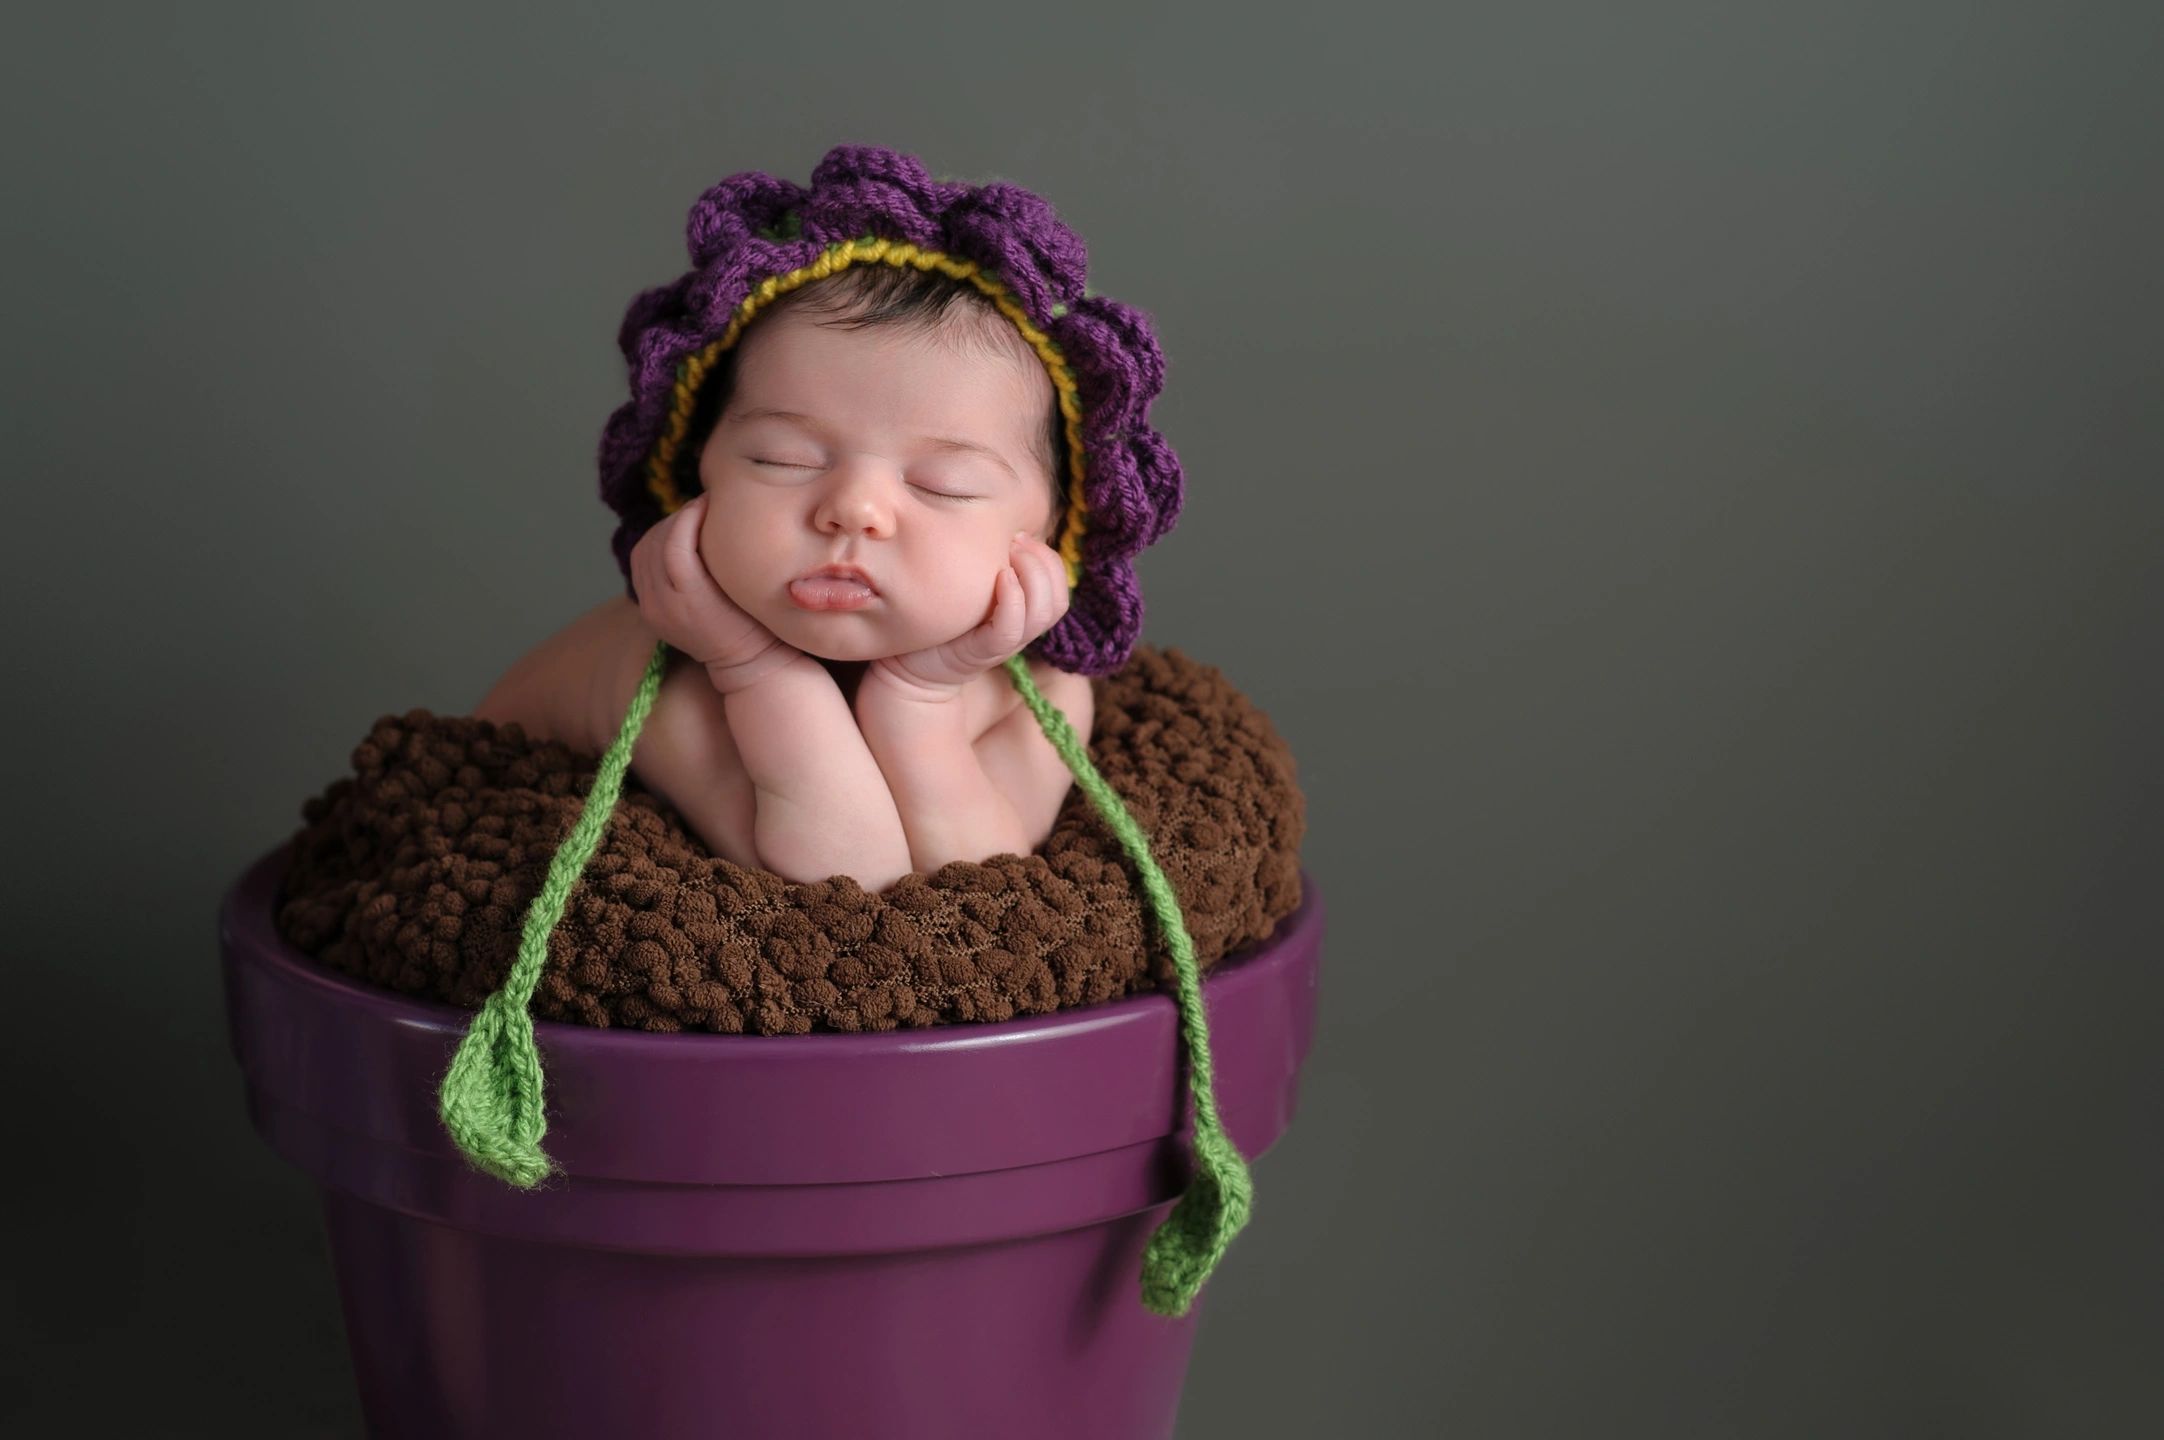 Newborn baby propping up head with hands, on purple flower pot wearing purple head band like flower